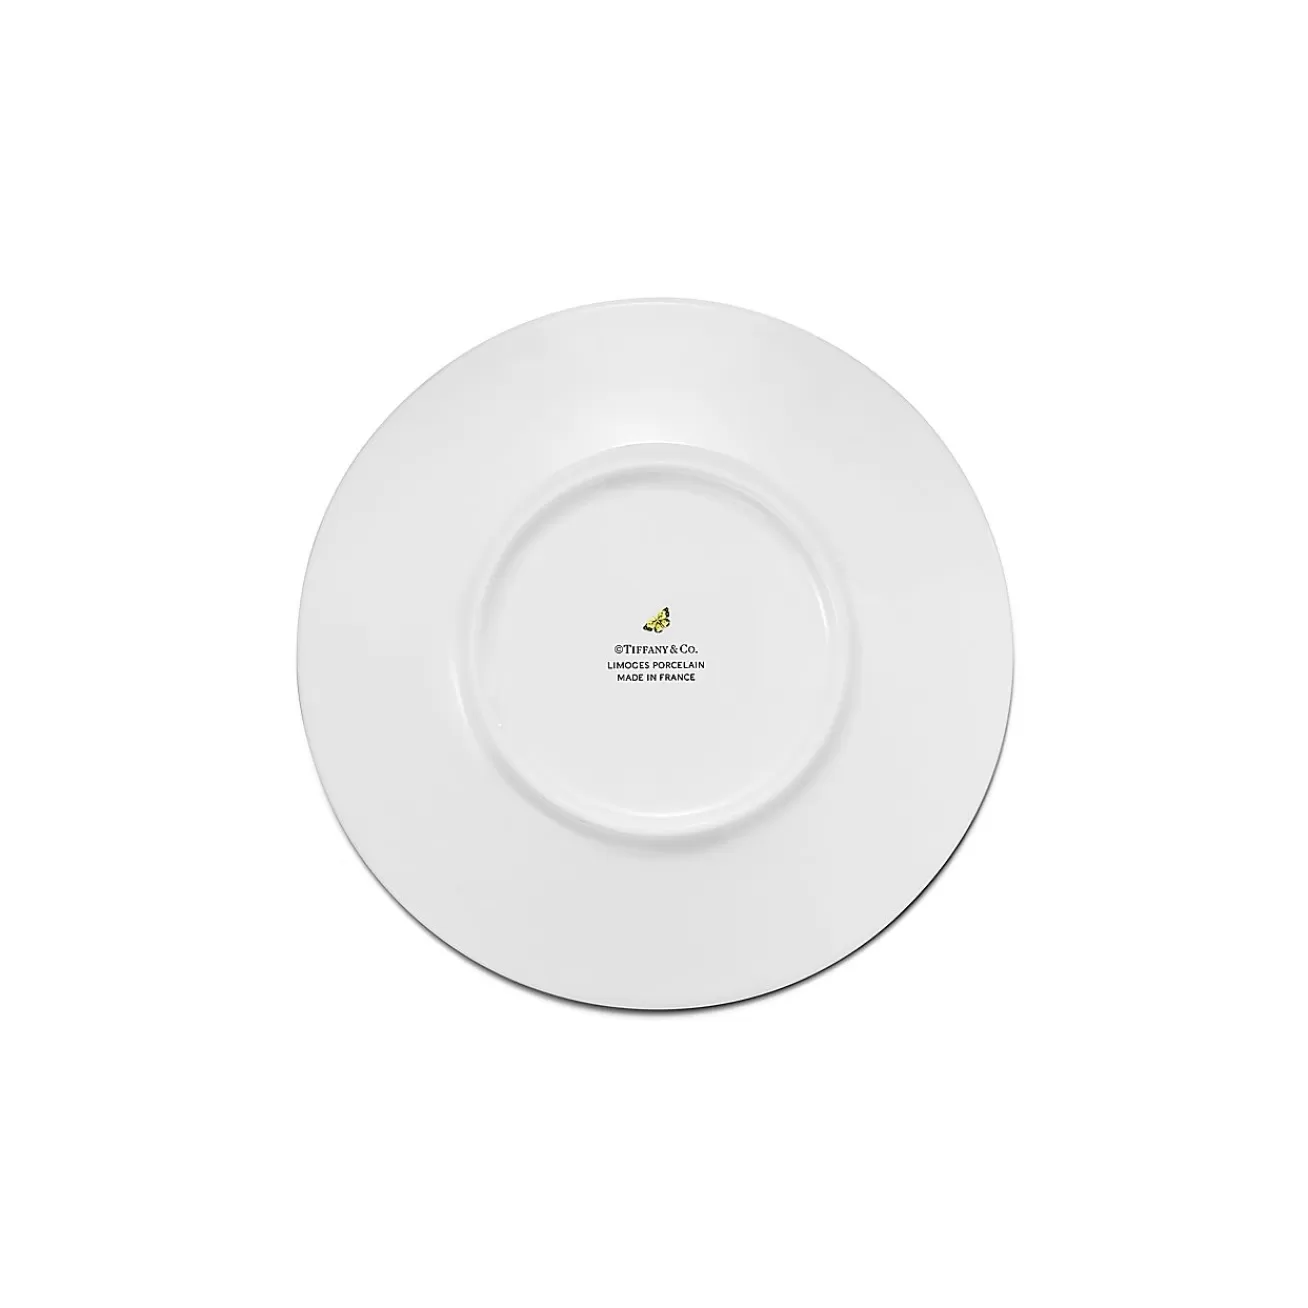 Tiffany & Co. Tiffany Jardin Bread and Butter Plate in Porcelain | ^ Tableware